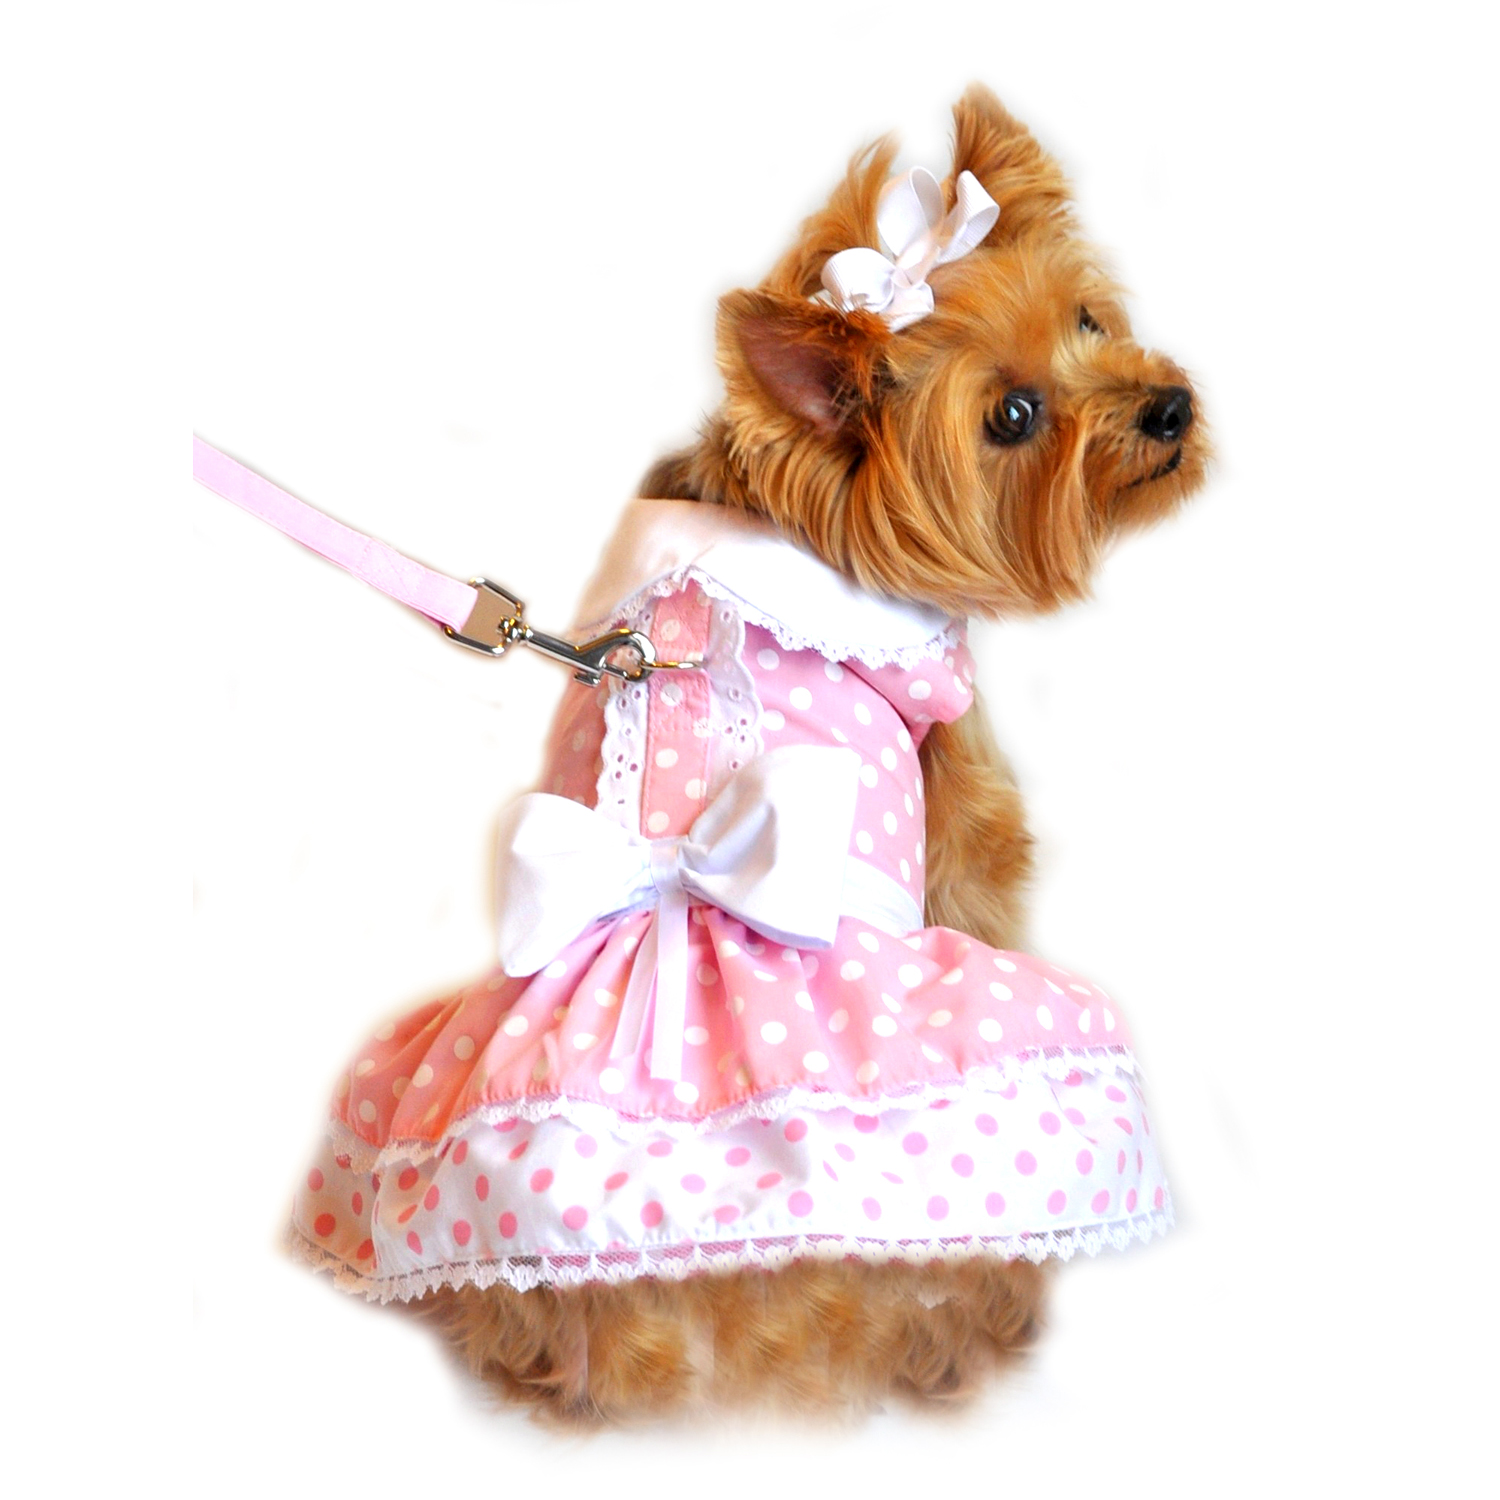 NACOCO Small Dog Star Dress with Leash Small Pet Puppy Cute Lace Skirt Sweet Pet Summer Clothes 